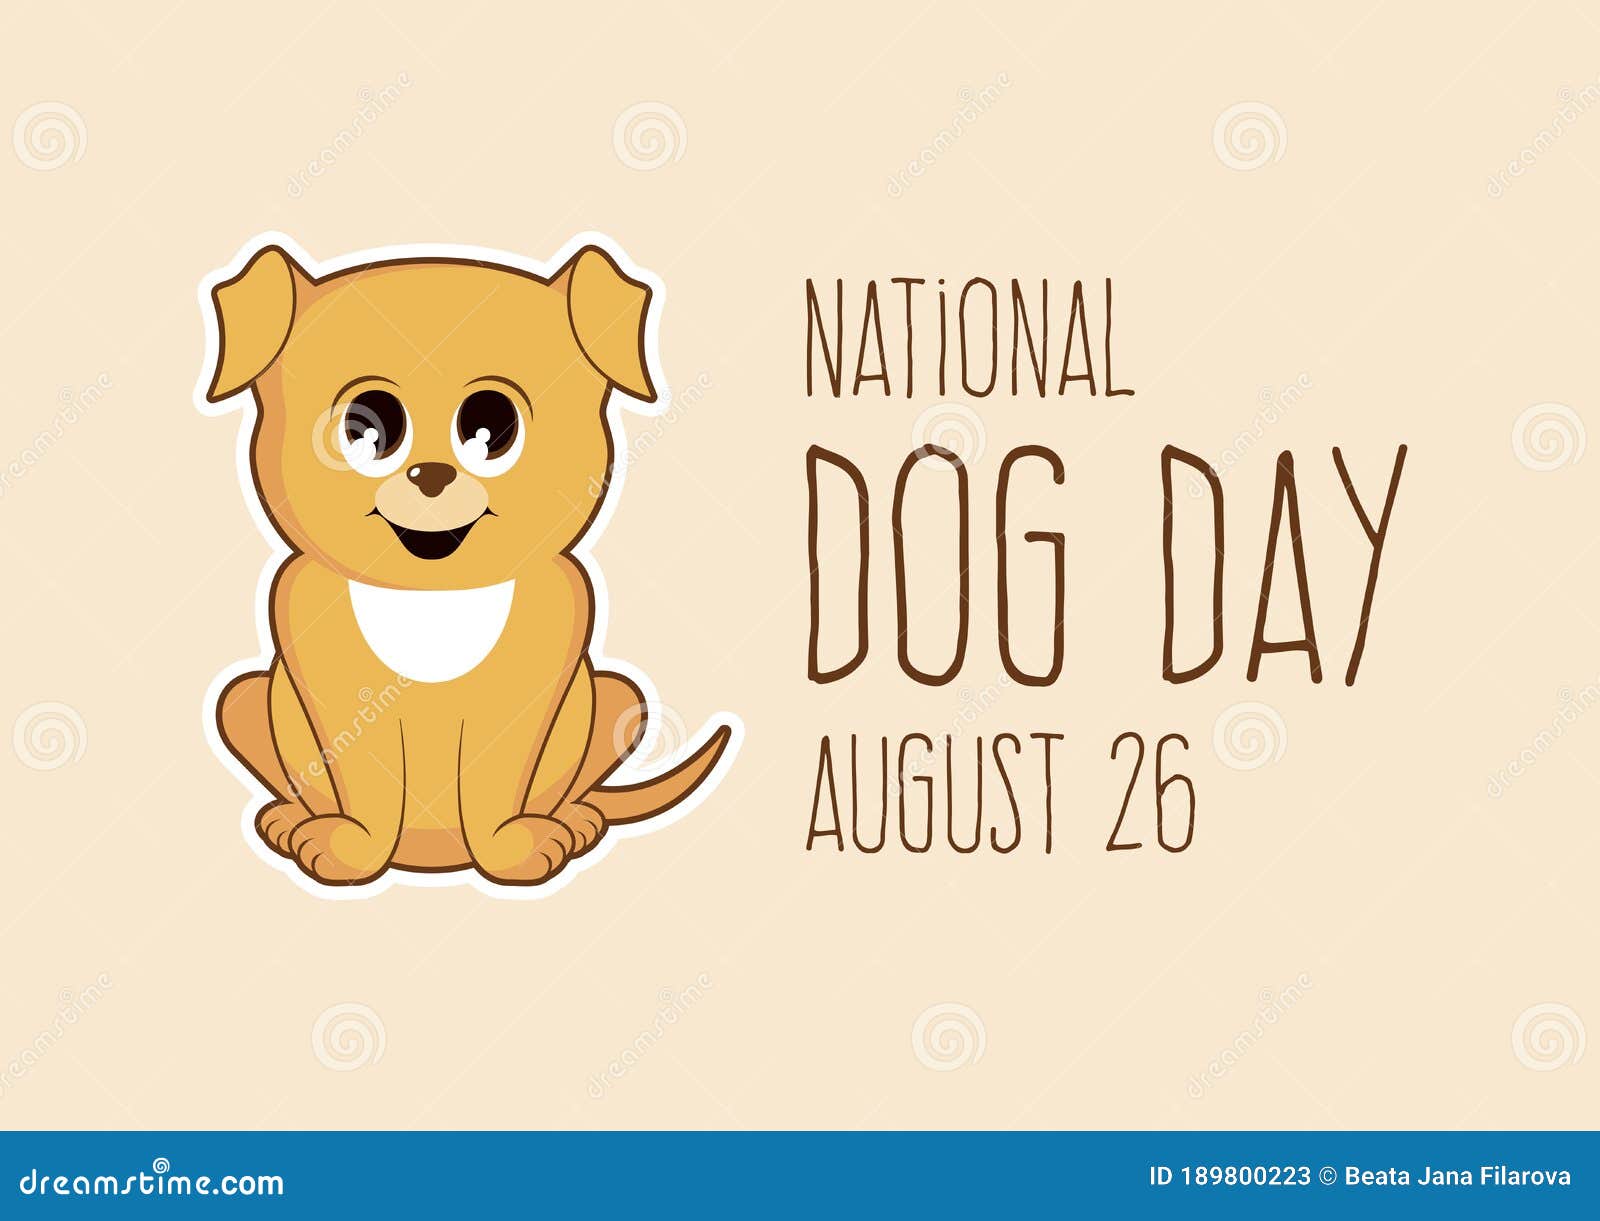 National Dog Day vector stock vector. Illustration of character 189800223